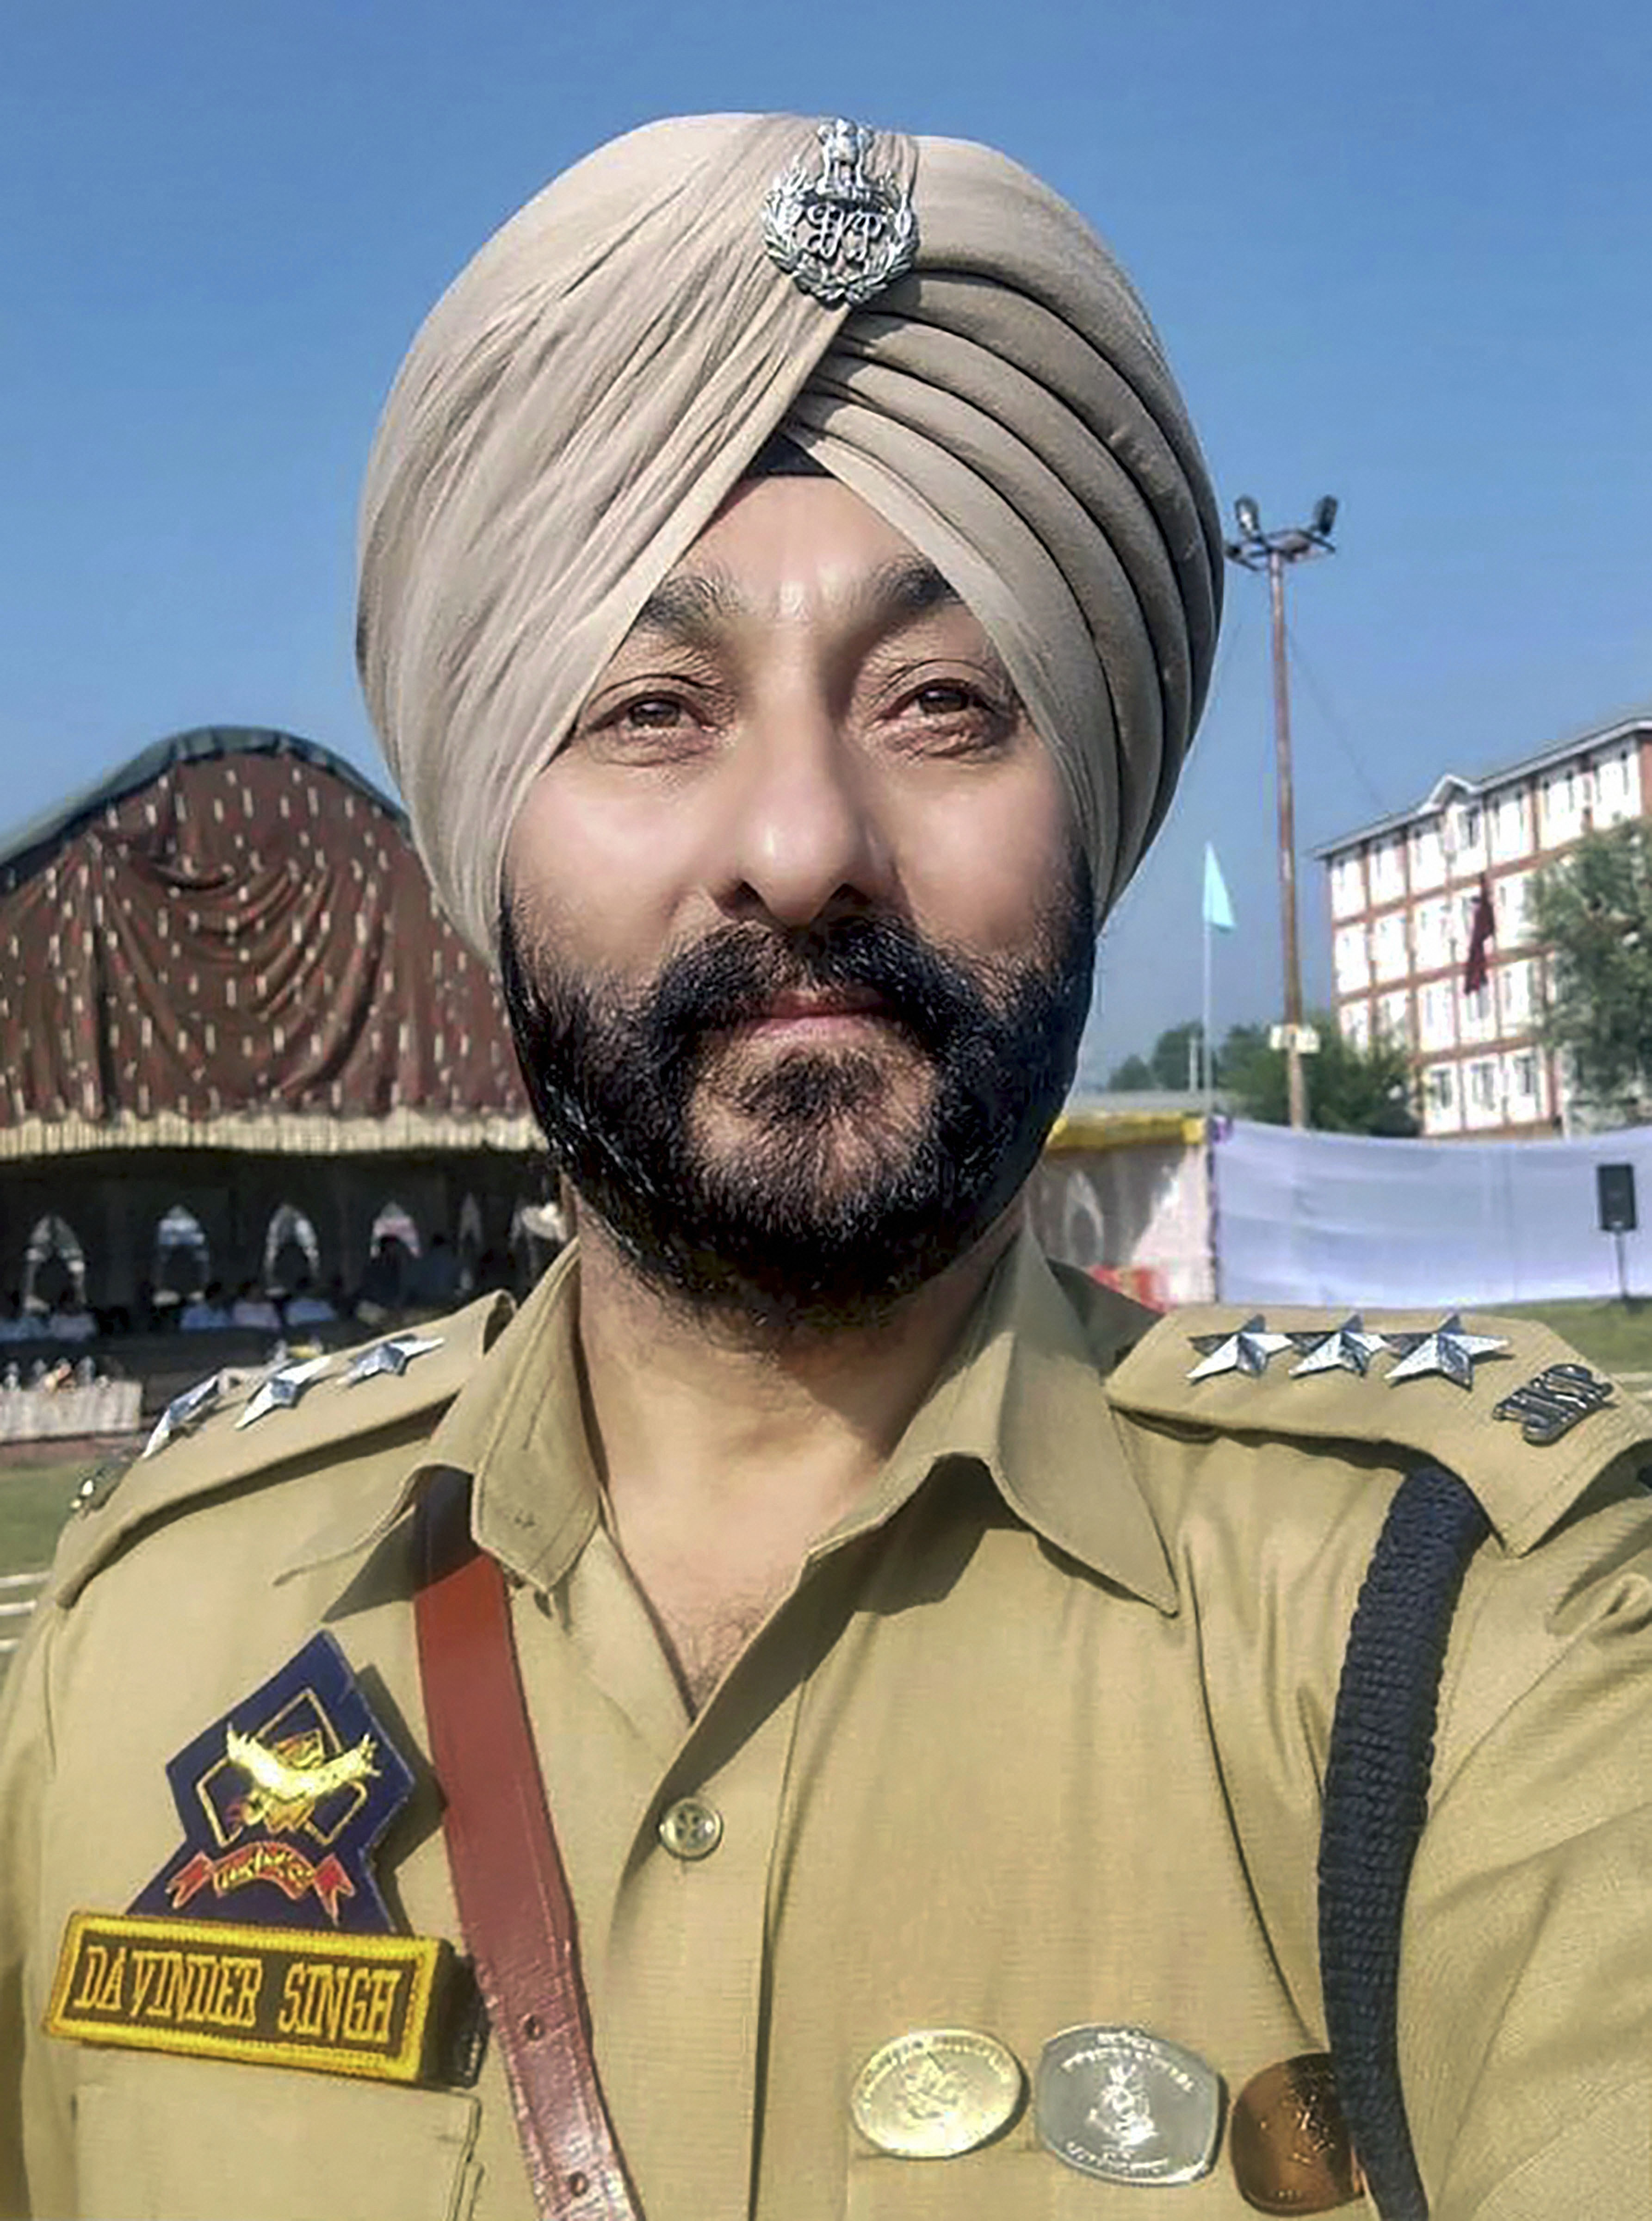 Police arrested DSP Davinder Singh (in photo) at Mir Bazar in Jammu and Kashmir's Kulgam district on Saturday, January 11, 2020, along with Hizbul Mujahideen terrorists Naveed Baba and Altaf, besides a lawyer who was operating as an overground worker for terror outfits.

